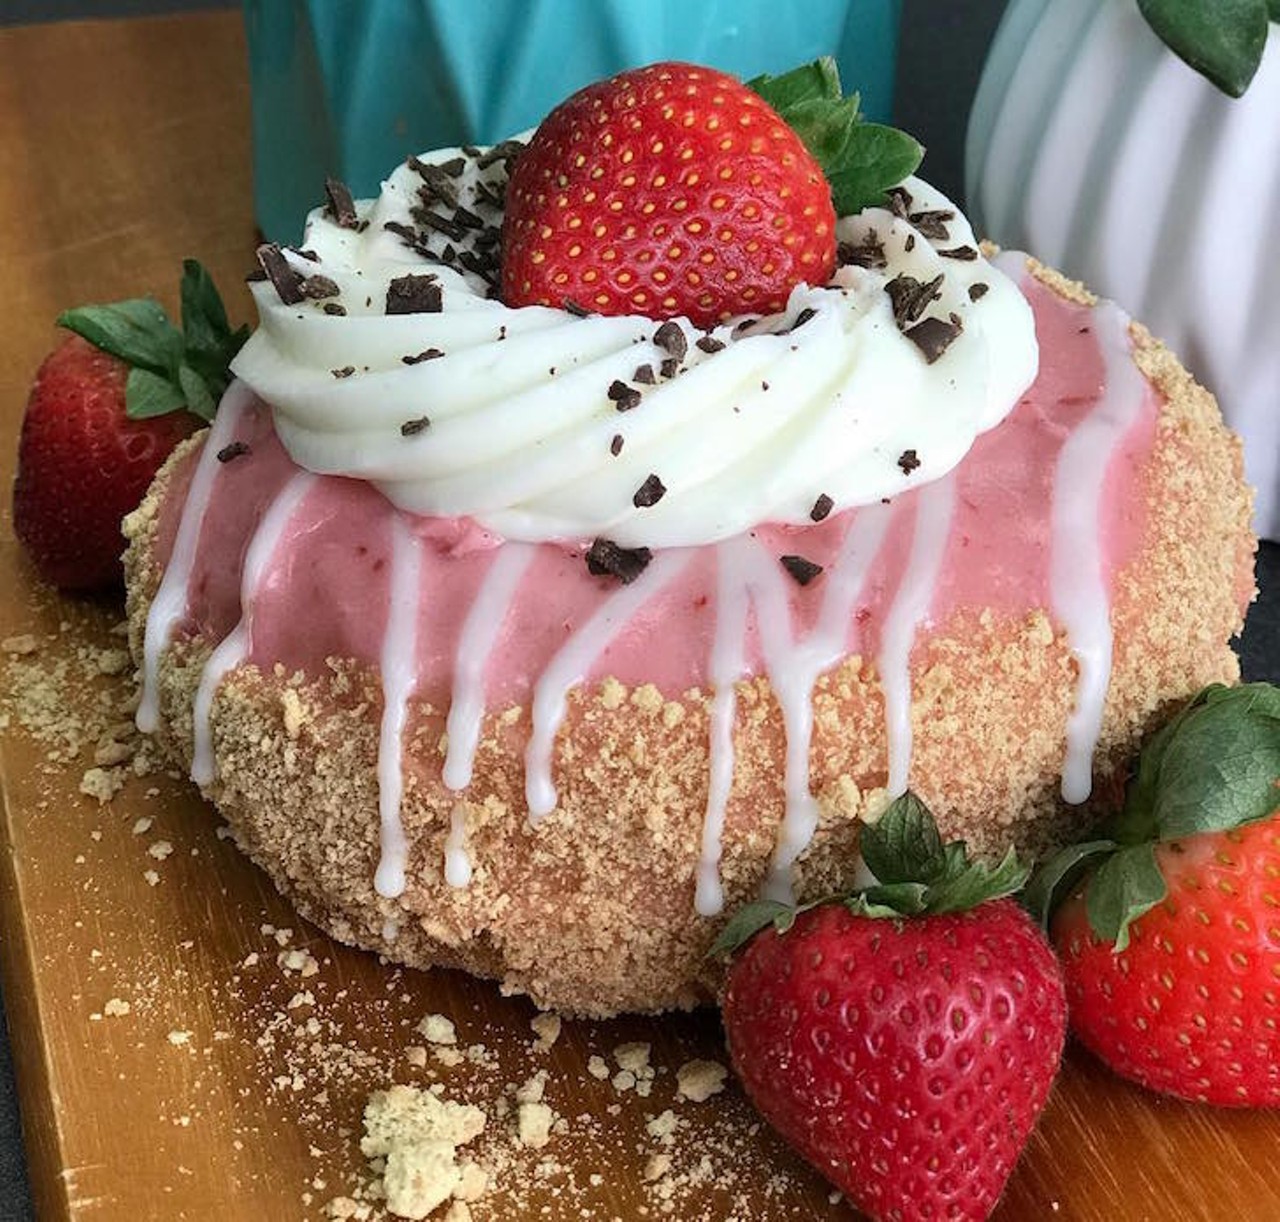 Must try: Strawberries and Cream
Photo via dgdoughnuts/Instagram